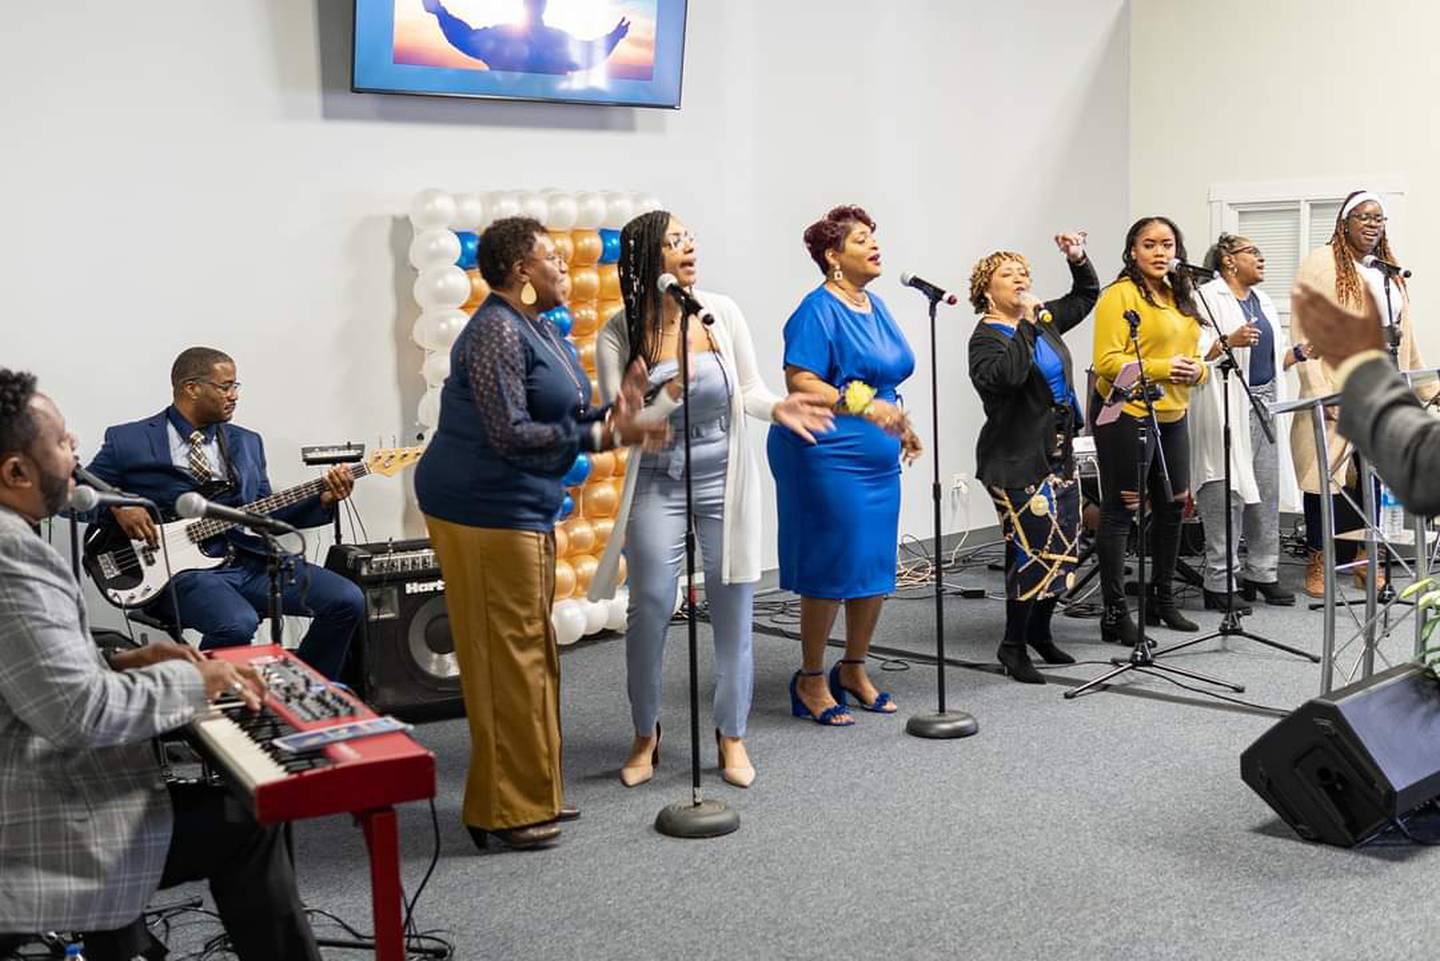 Members of The Way Church of Joliet celebrate its eighth anniversary in April 2022 at its new space on Theodore Street in Joliet.